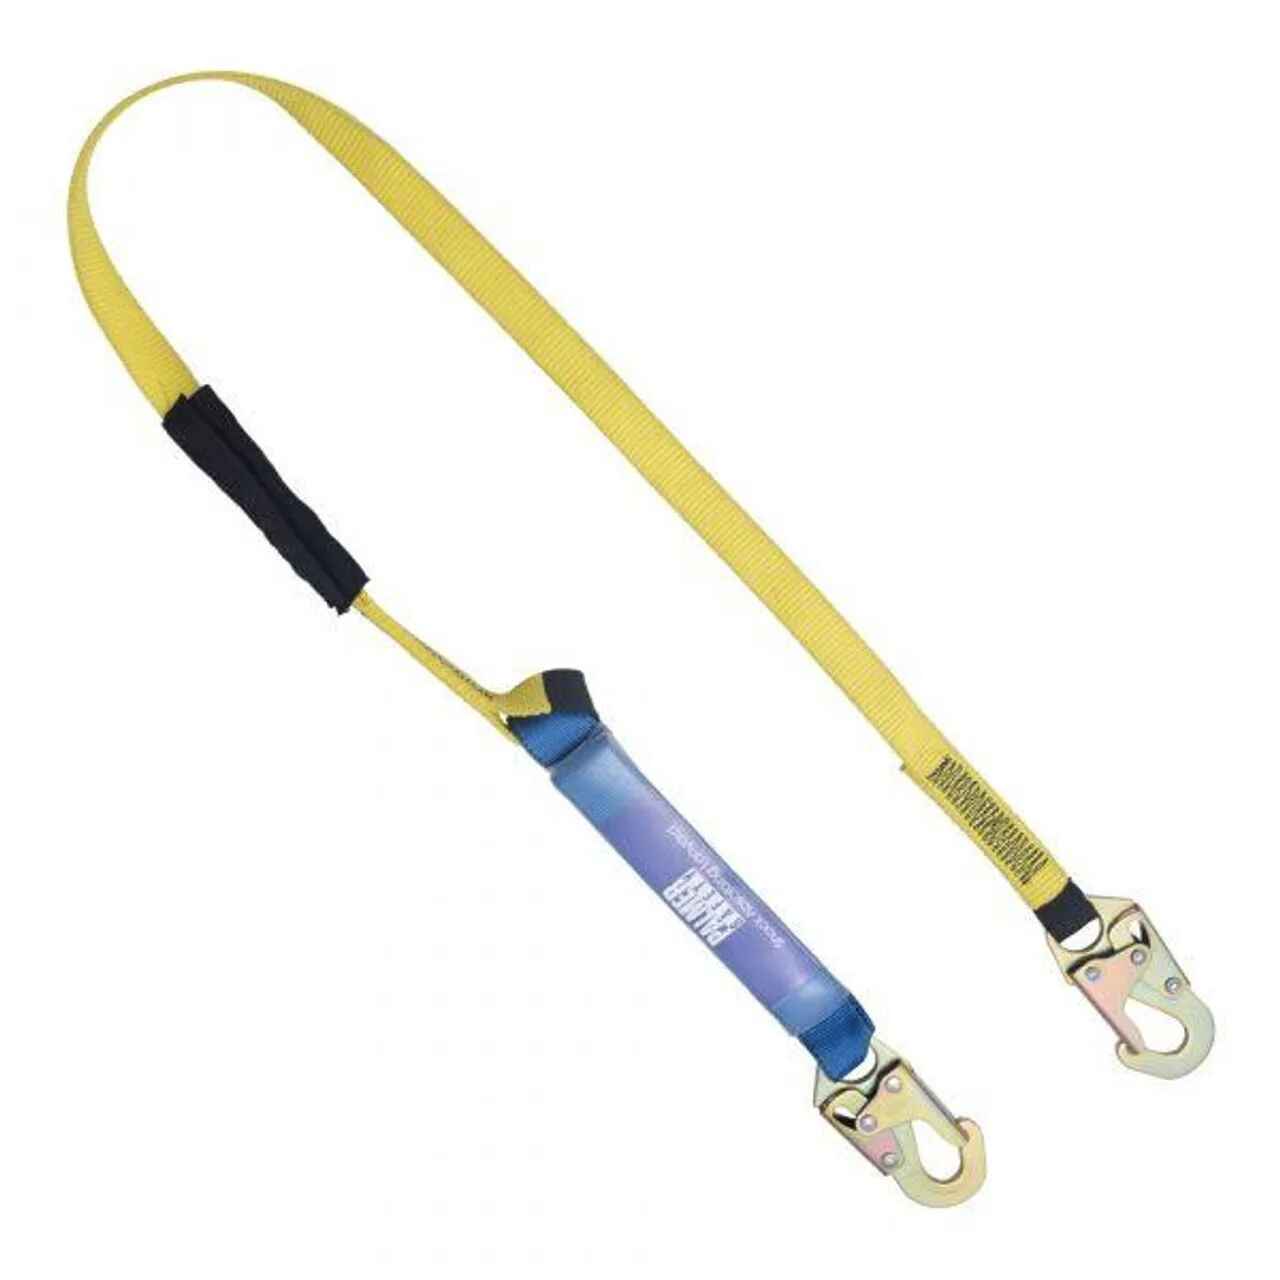 Adjustable lanyard w/ D-ring extender attached - Quad City Safety